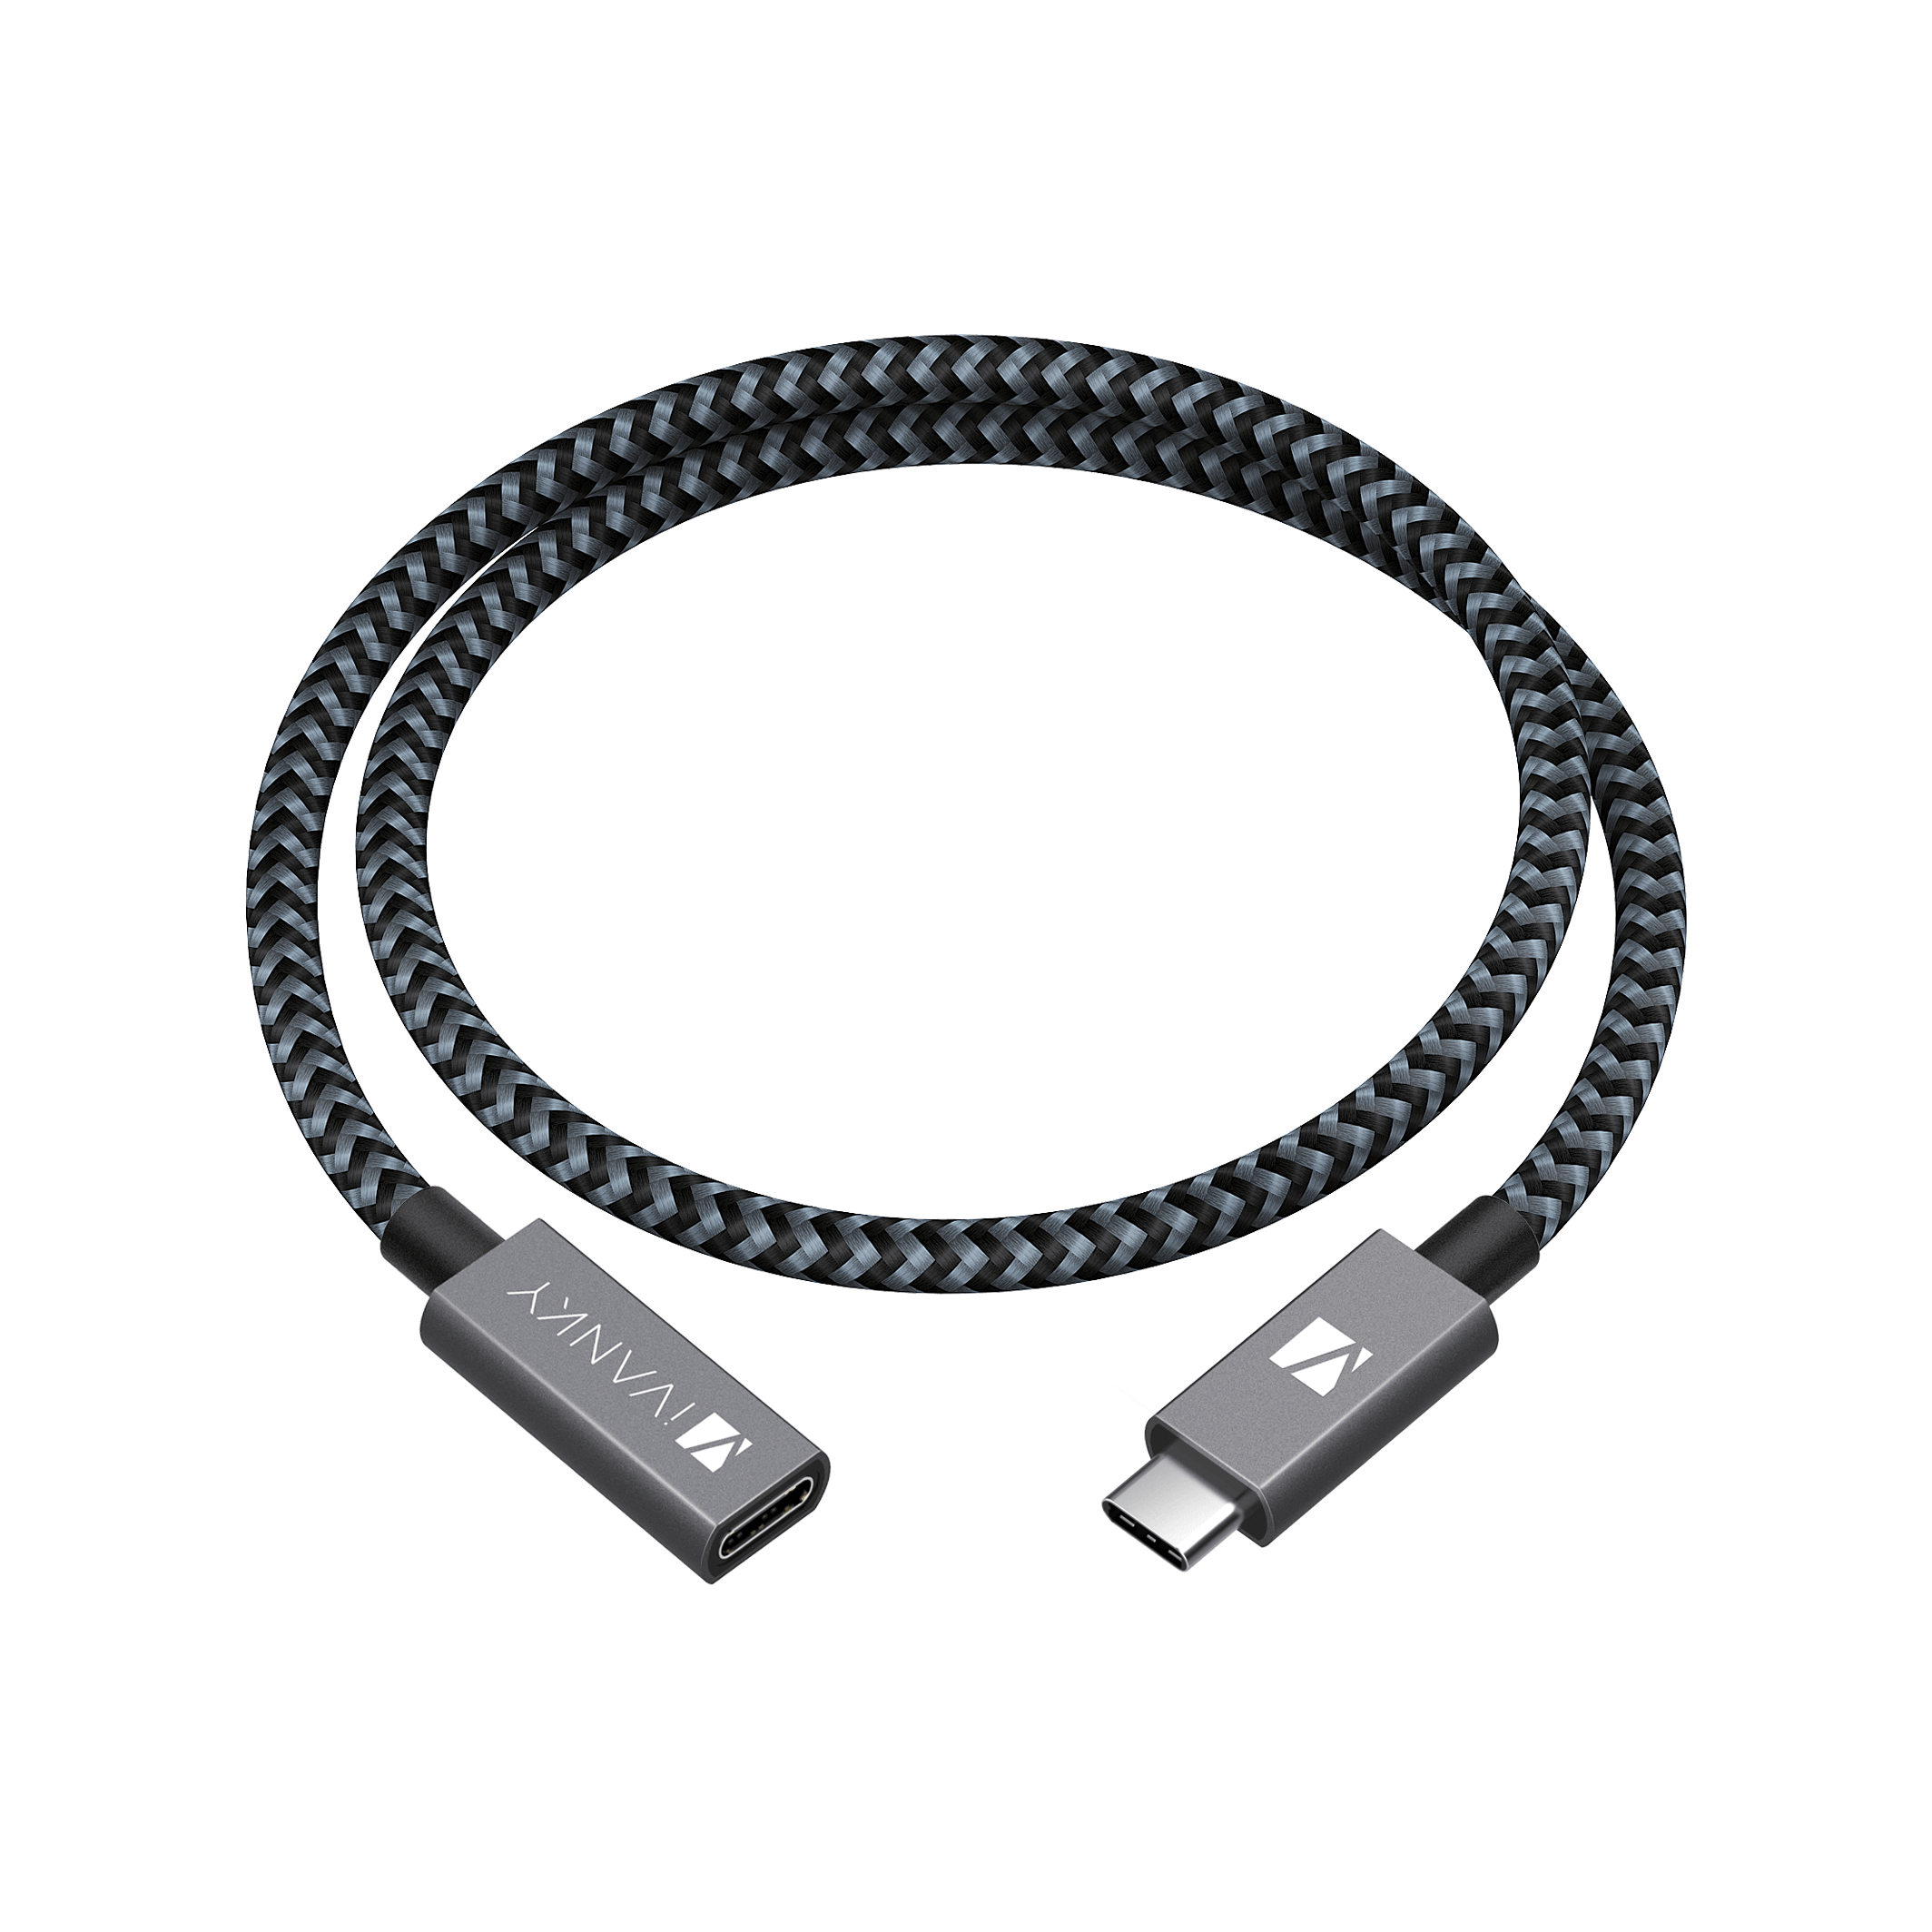 4k-usb-c-extension-cable-ivanky